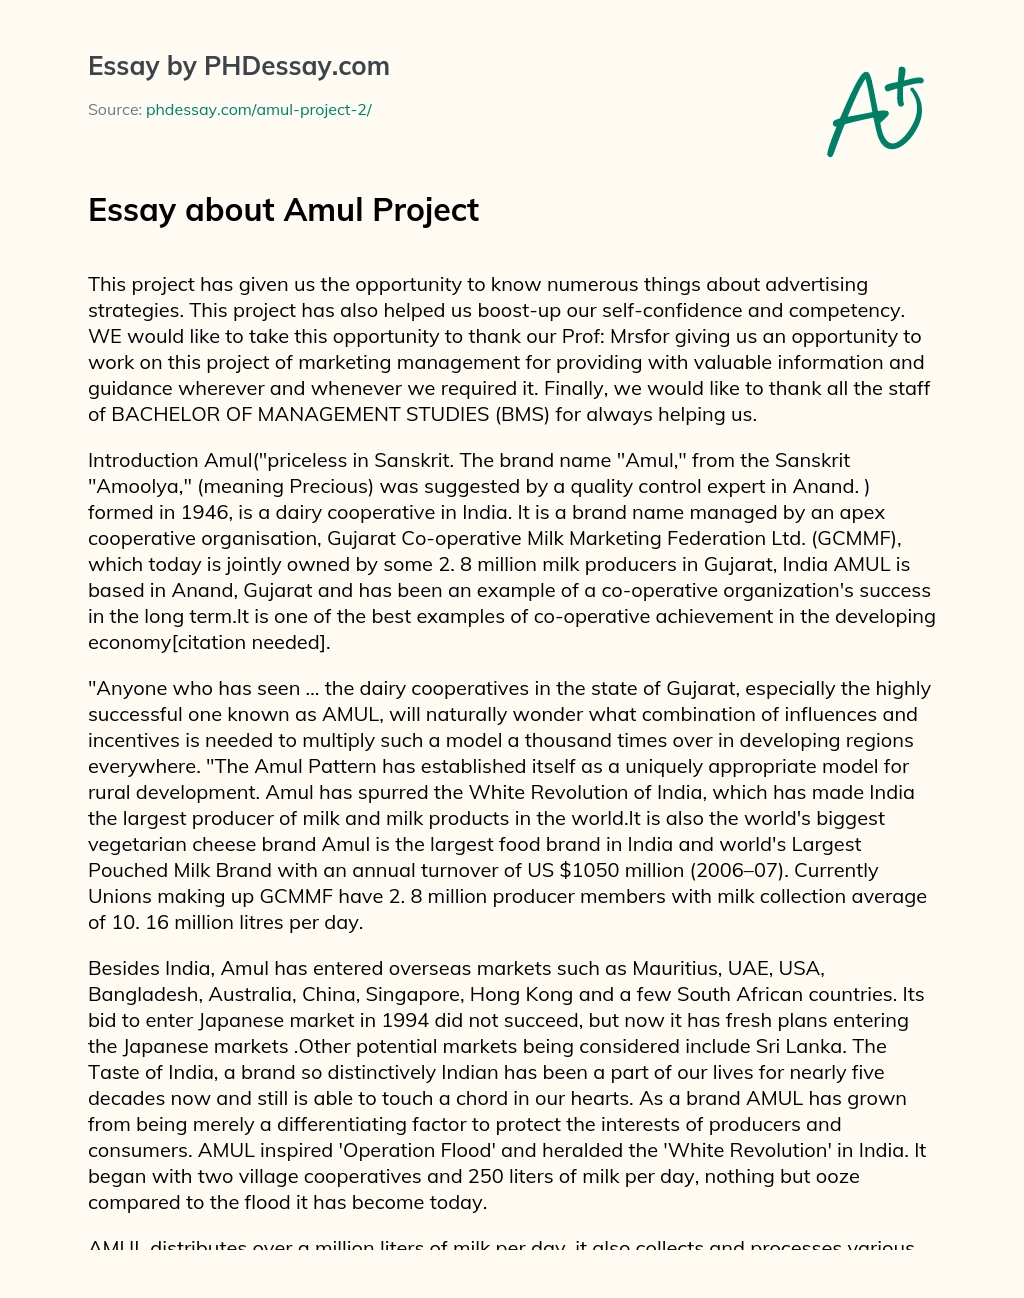 Essay about Amul Project essay